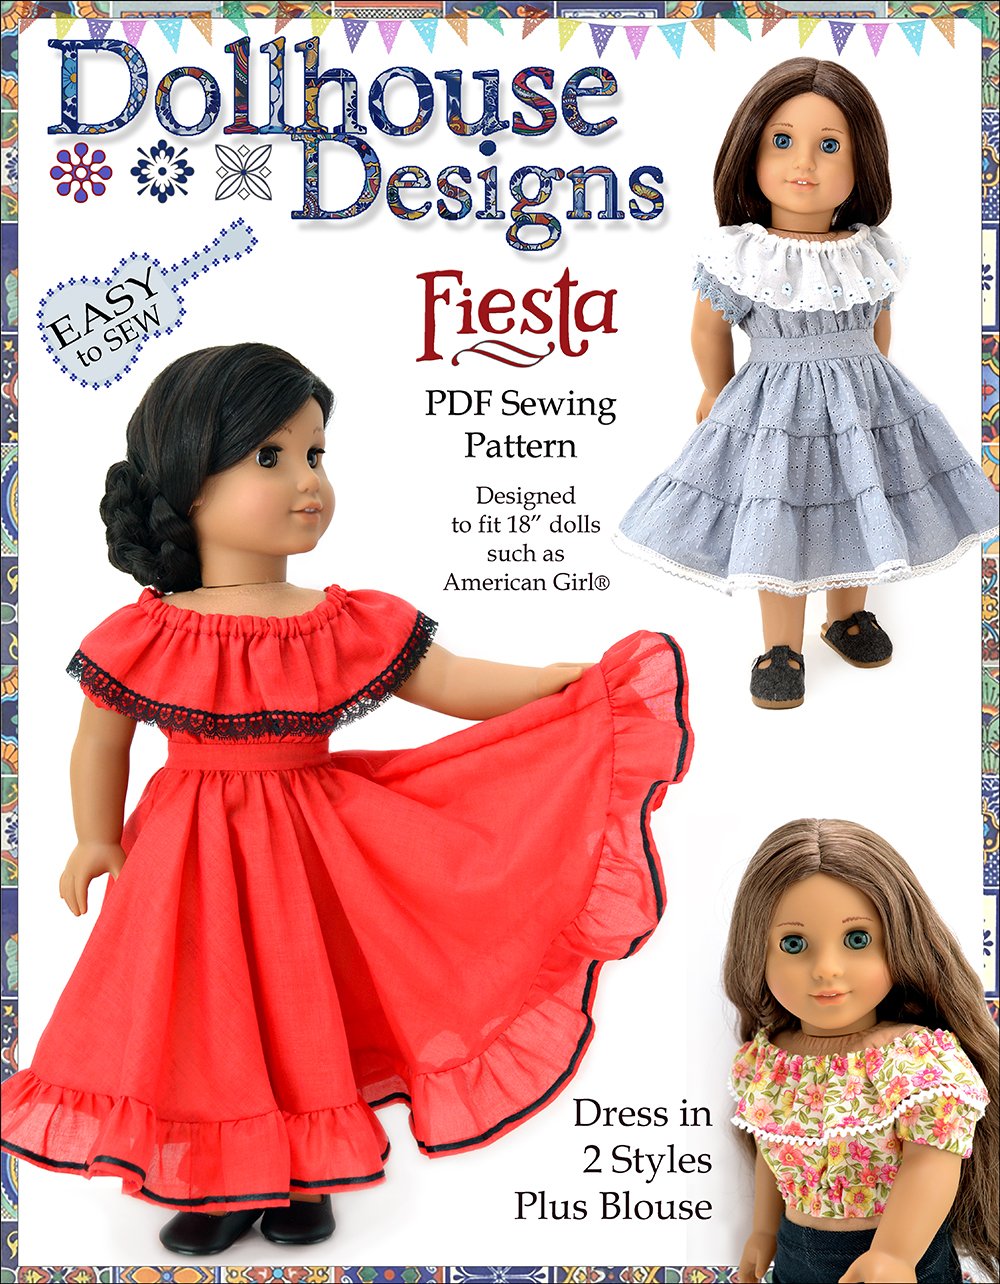 18 American Girl Size PDF Sewing Pattern: Sweet and SIMPLE